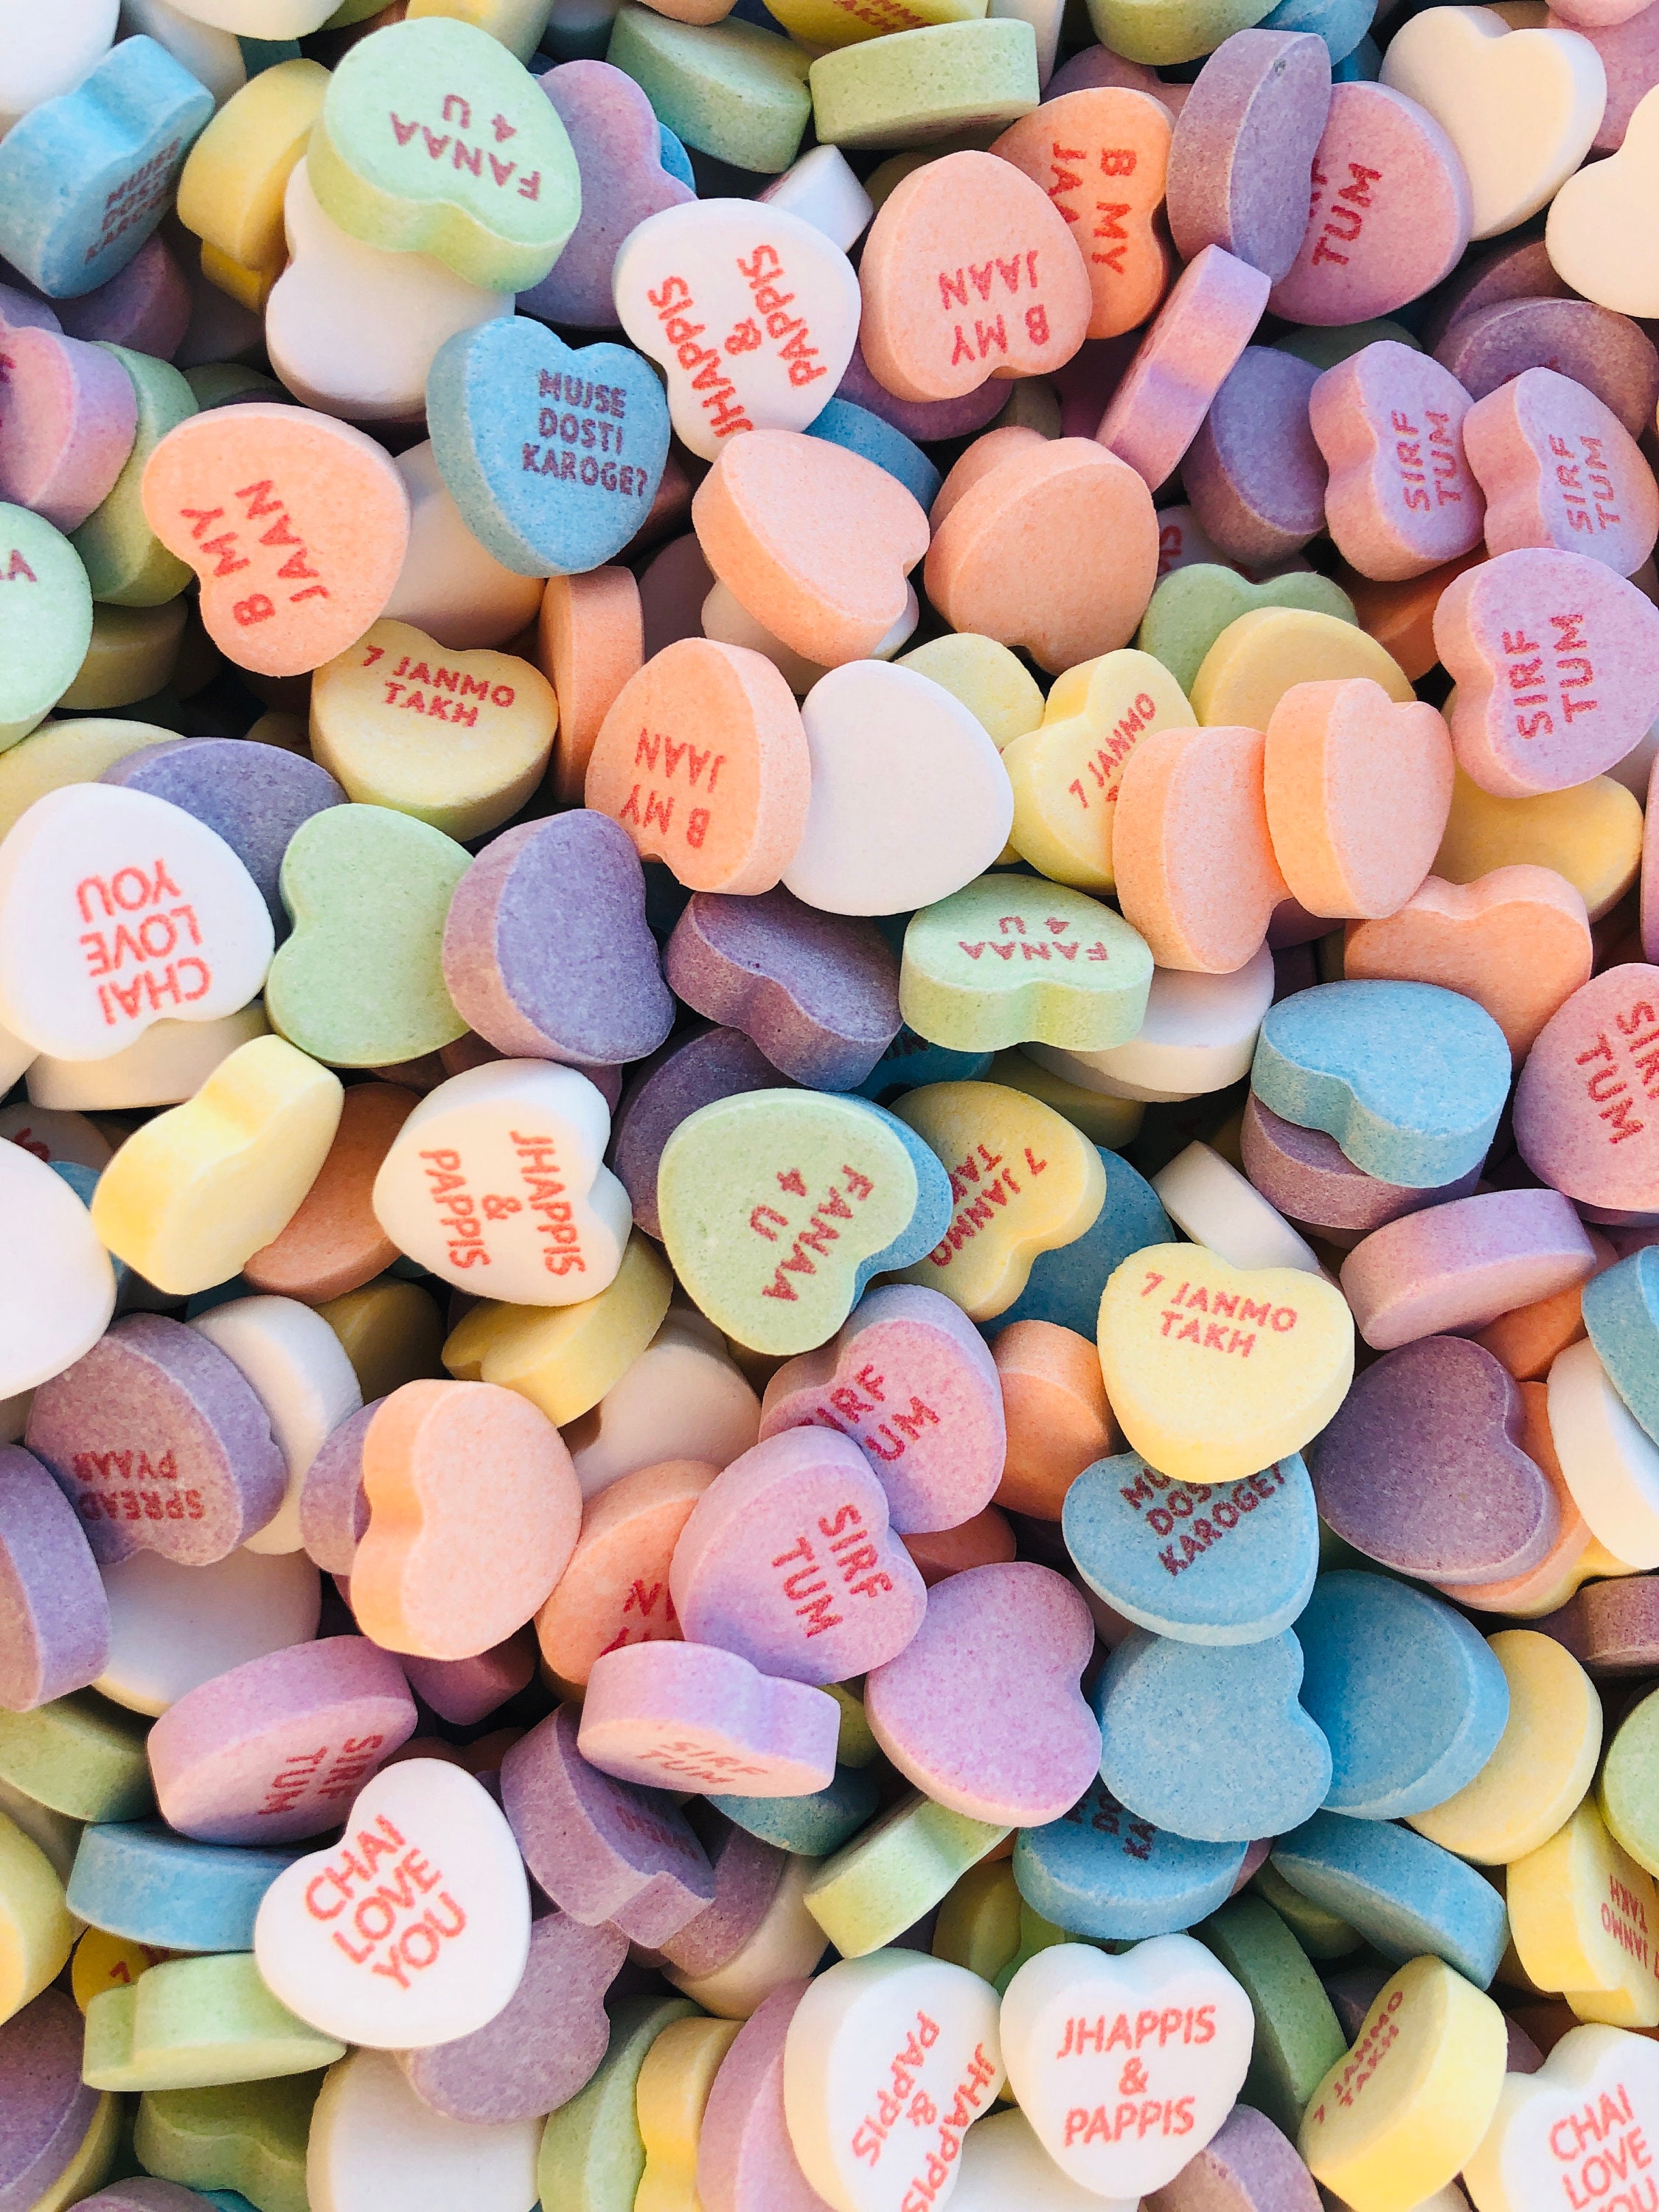 Sweethearts Original Conversation Hearts Valentine Candy Boxes - Shop Candy  at H-E-B